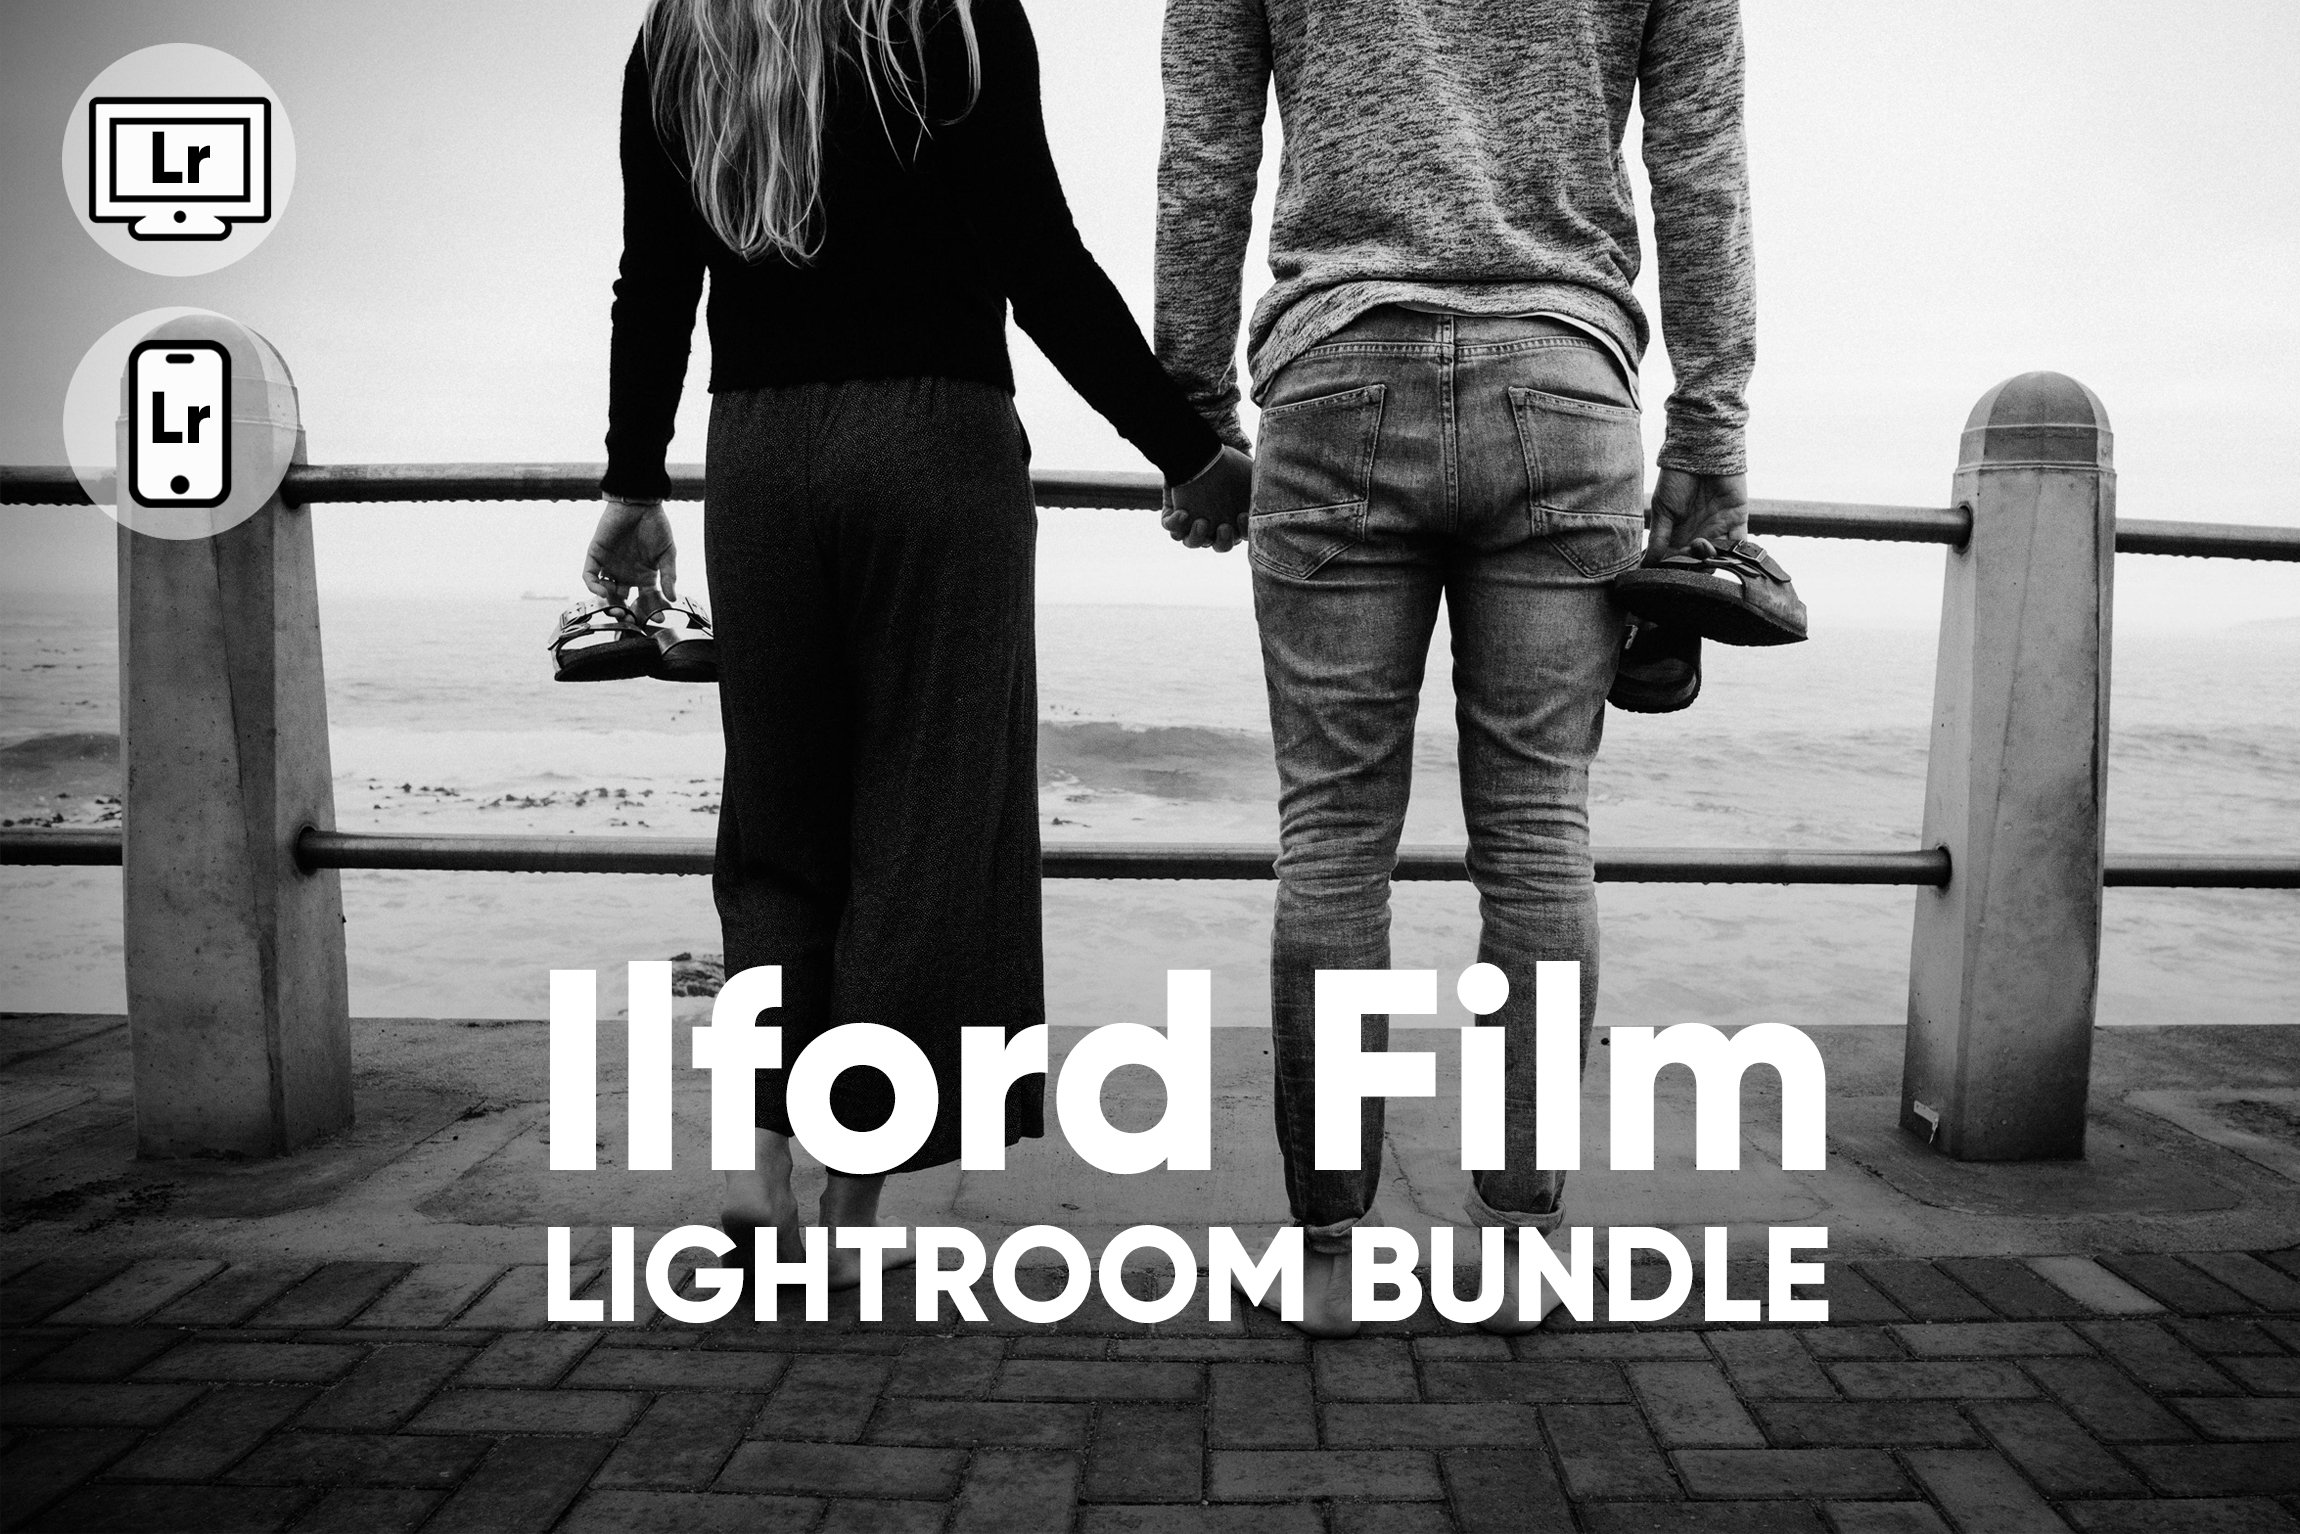 Ilford Film for Lightroom PC/Mobilecover image.